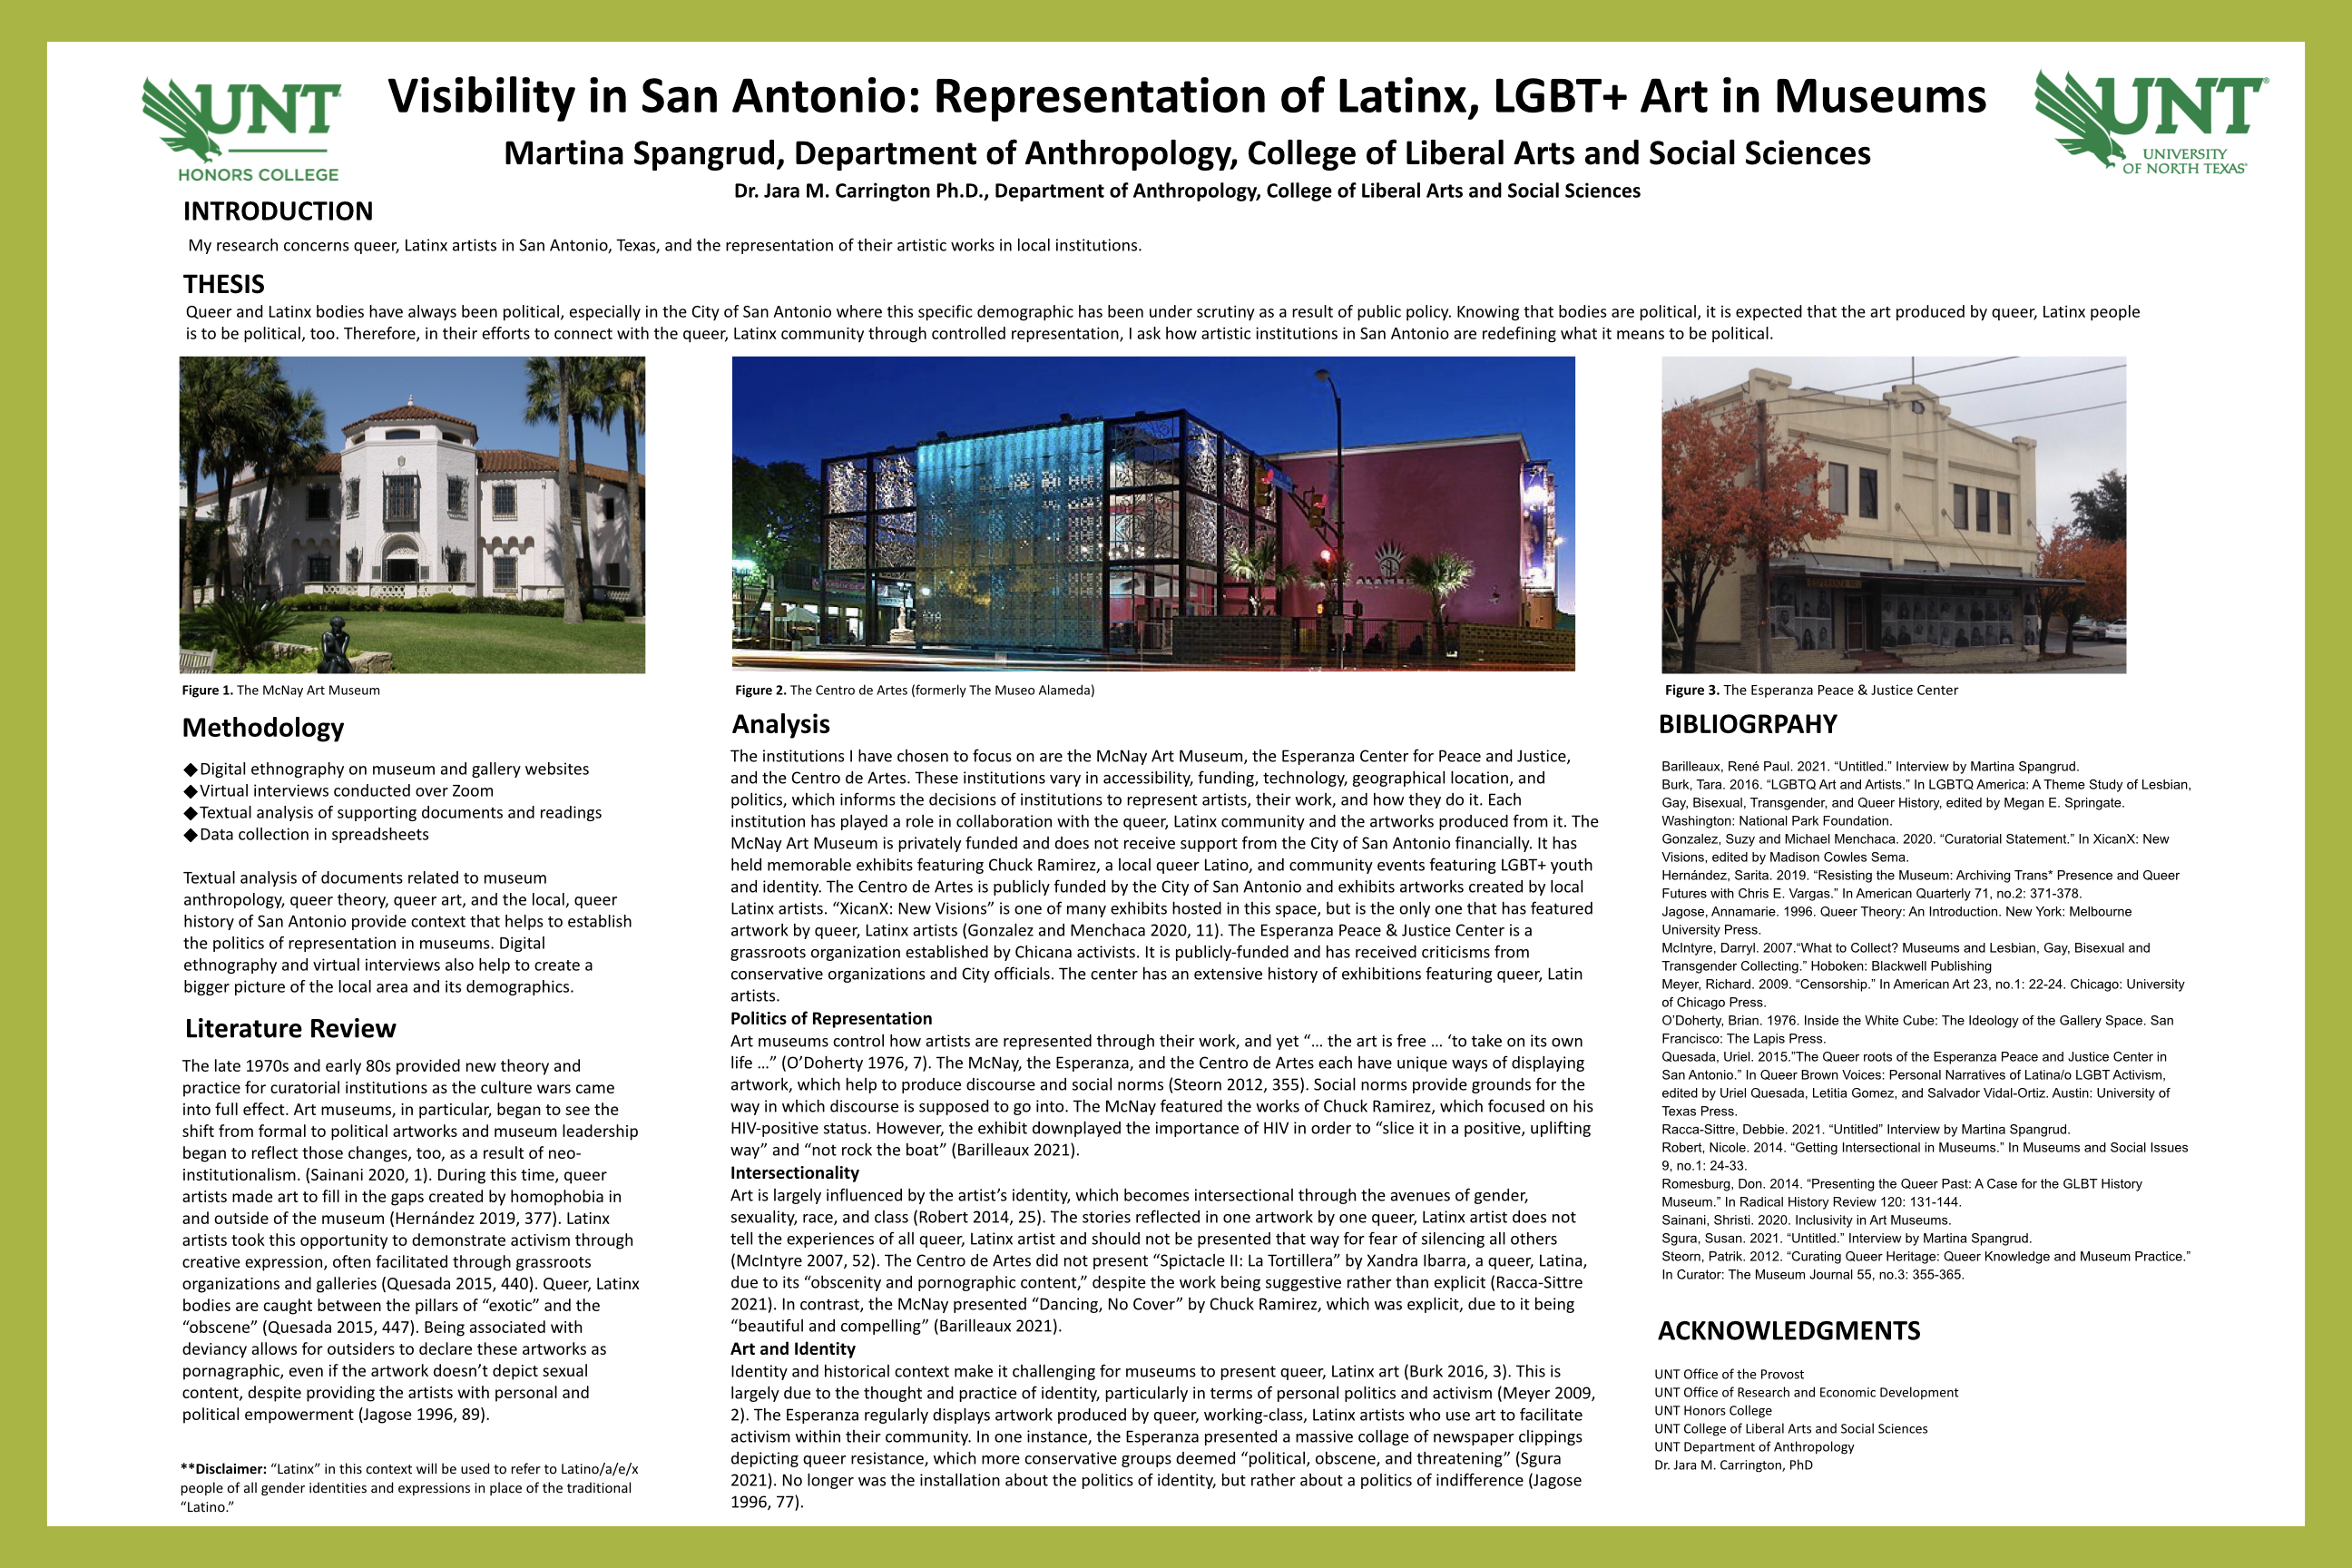 Visibility in San Antonio: Representation of Latinx, LGBT+ Art in Museums